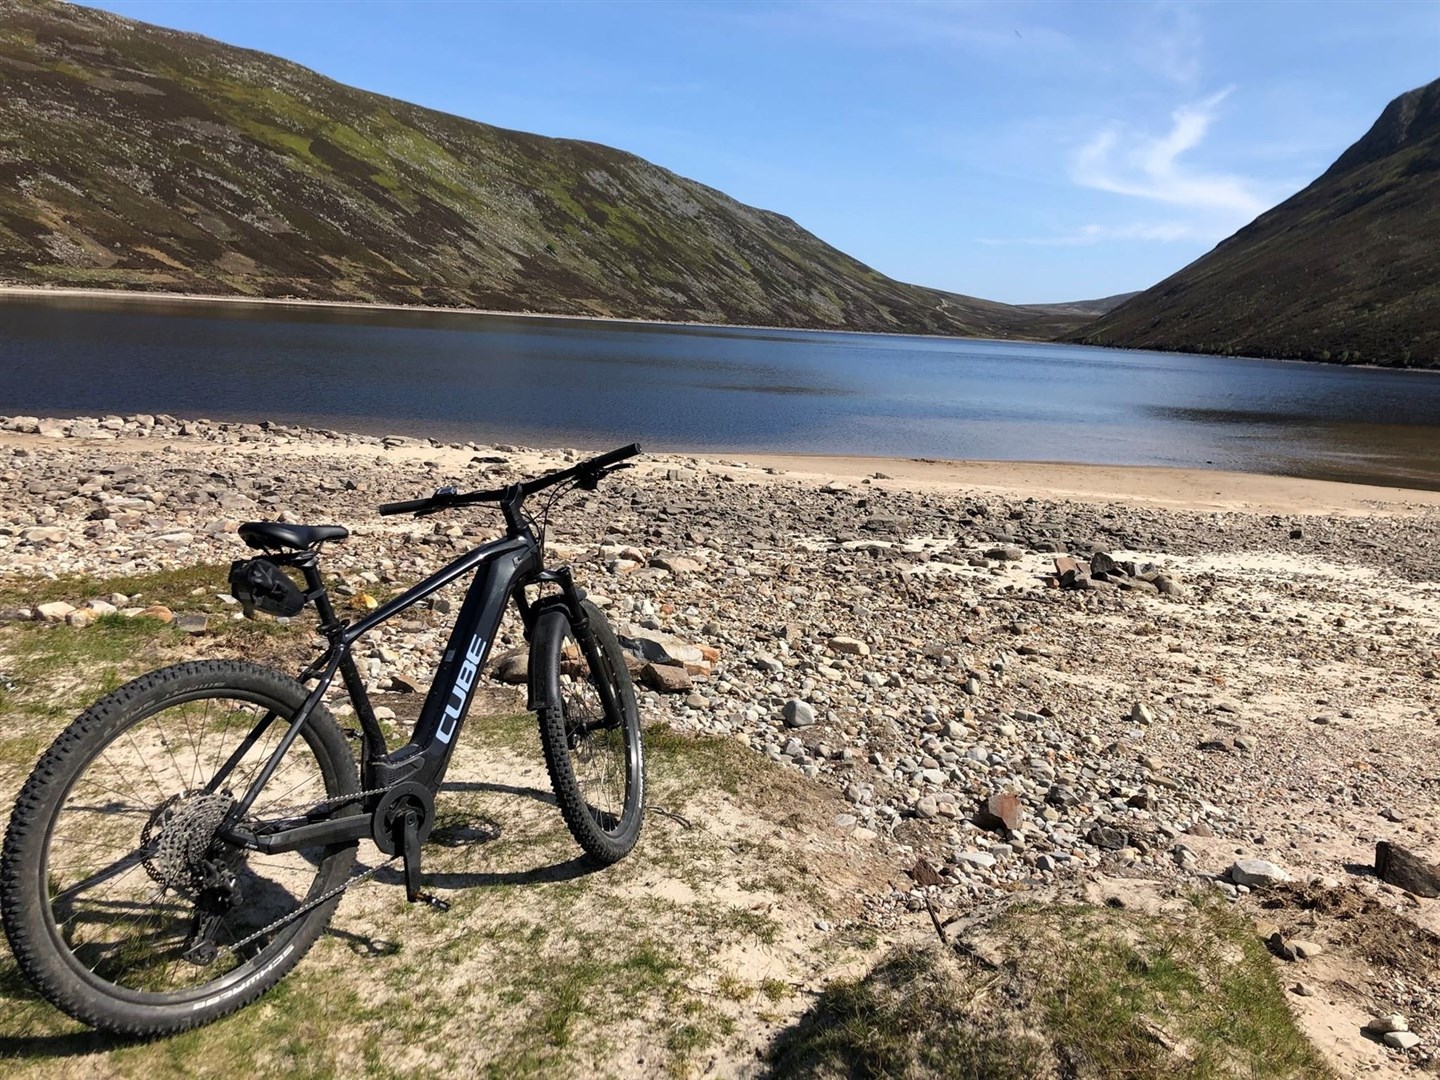 Police say a high value e-bike, together with its charger was stolen in a housebreaking in Kingussie. Photo: Police Scotland